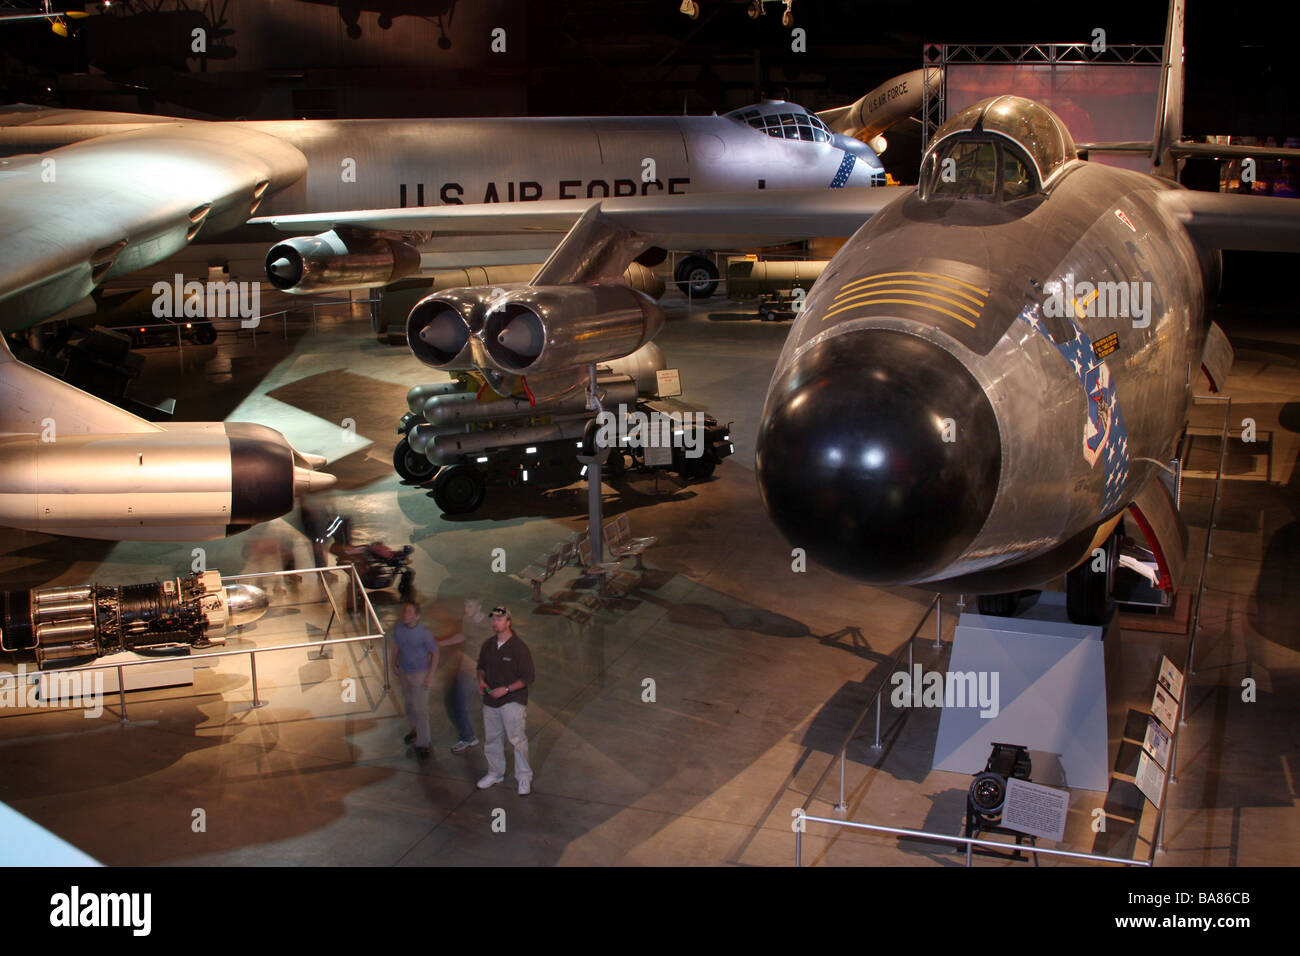 United States Air Force Museum Dayton, Ohio Wright Patterson Foto Stock